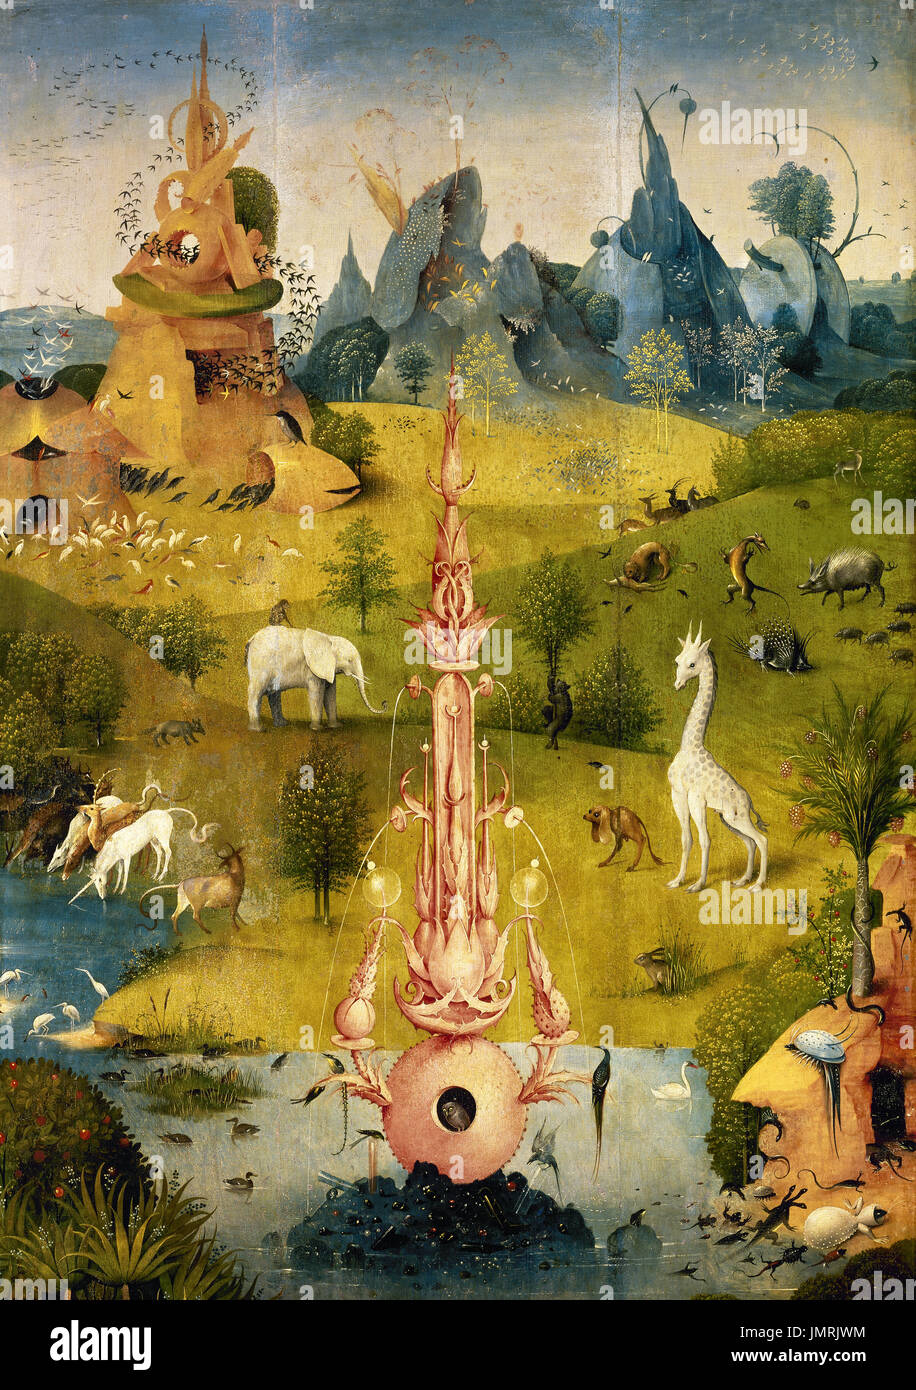 Hieronymus Bosch (c.1450-1516). Dutch painter. The Garden of Earthly Delights, 1500-1505, Triptych. Detail of a left panel. Prado Museum. Madrid. Spain. Stock Photo